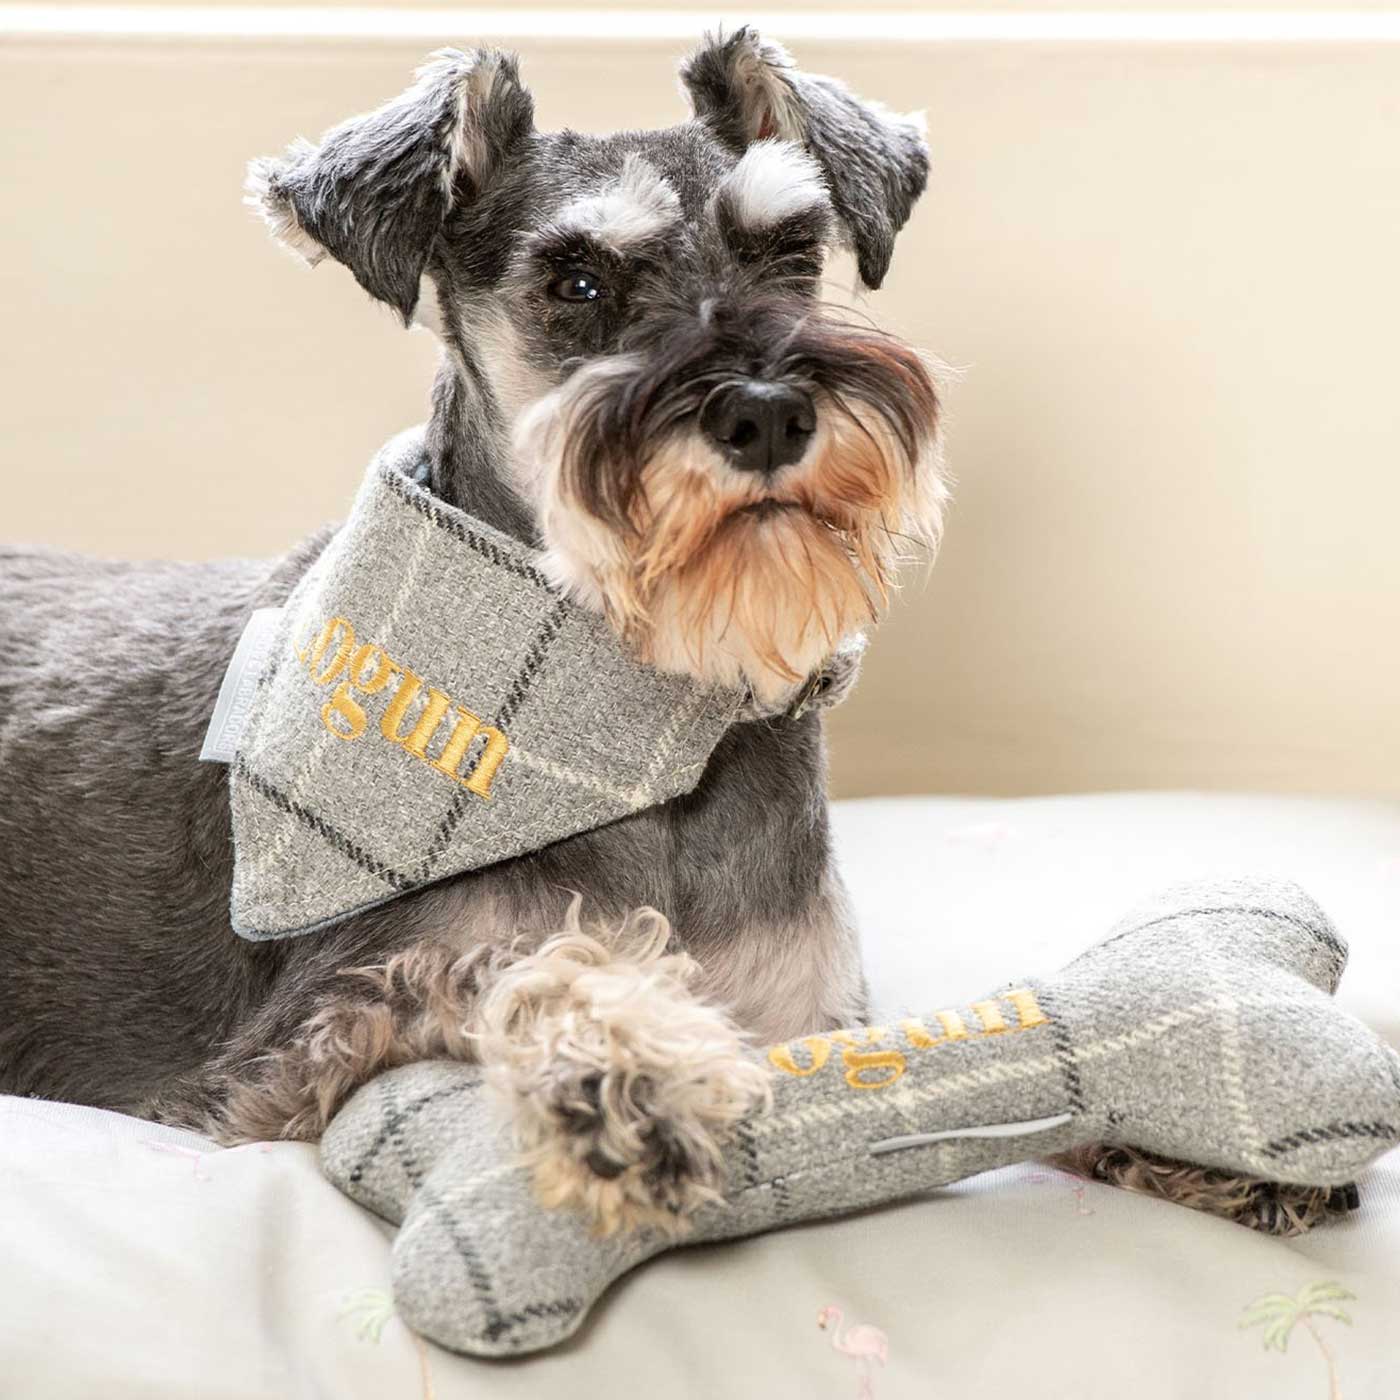 [color:grey tweed check] Present The Perfect Pet Playtime With Our Luxury Dog Bone Toy, In Stunning Balmoral Grey Tweed Check! Available To Personalize Now at Lords & Labradors US, Shop Luxury Dog Toys Online